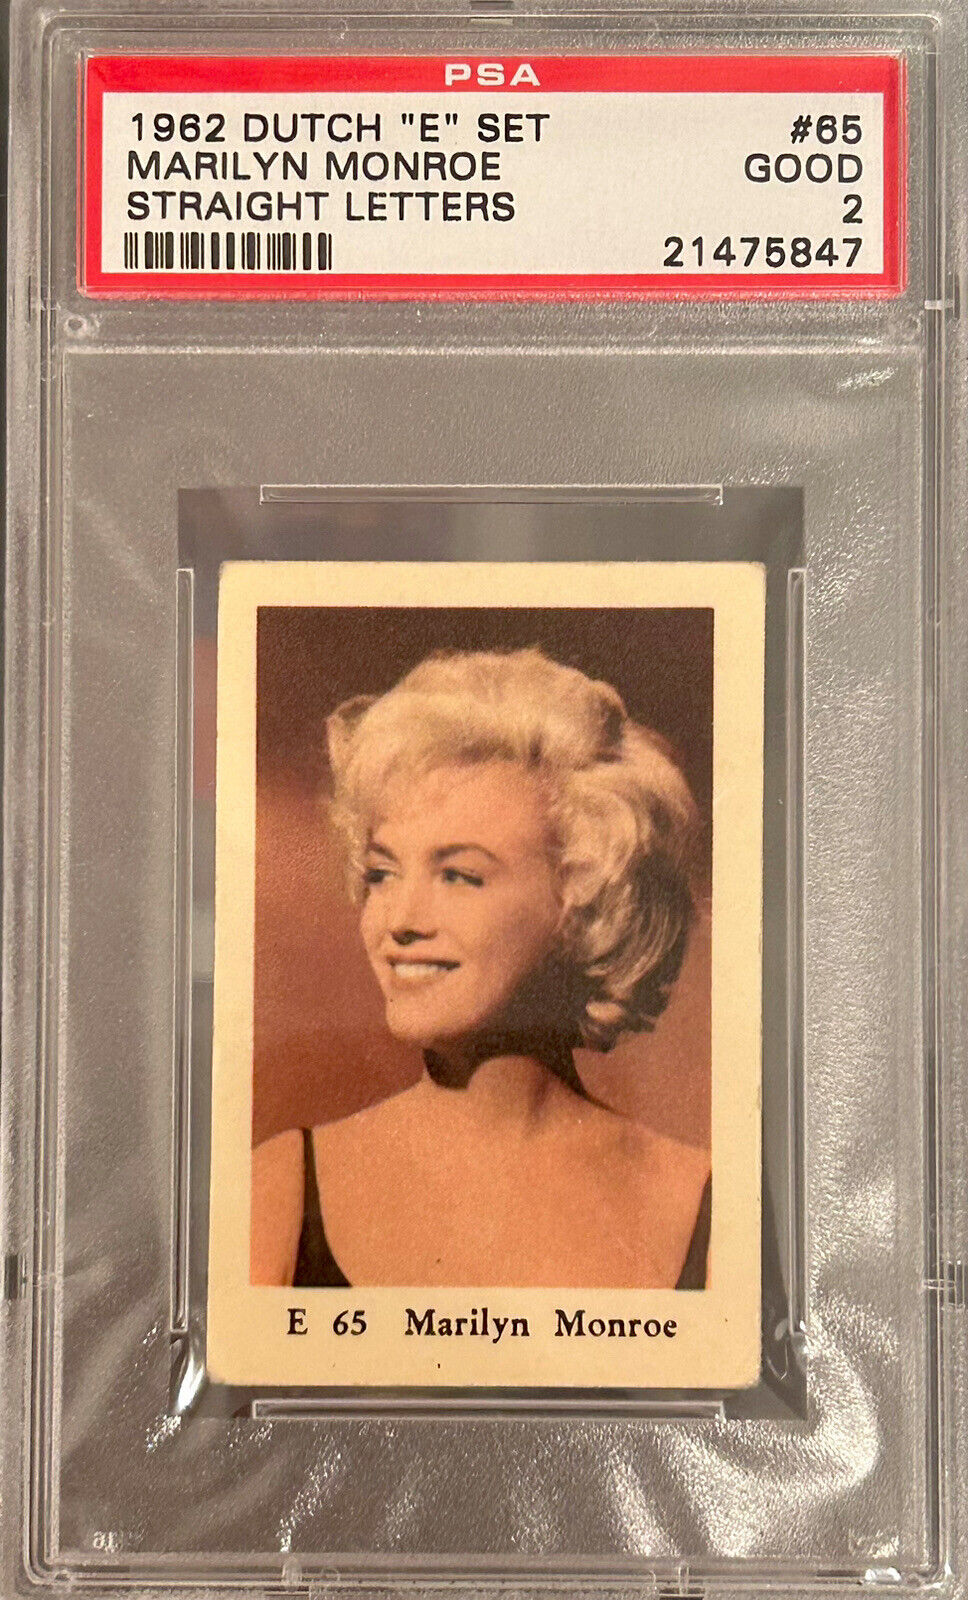 Marylin Monroe 1962 (PSA) 2 GOOD Authentic Trading Card – Beverly